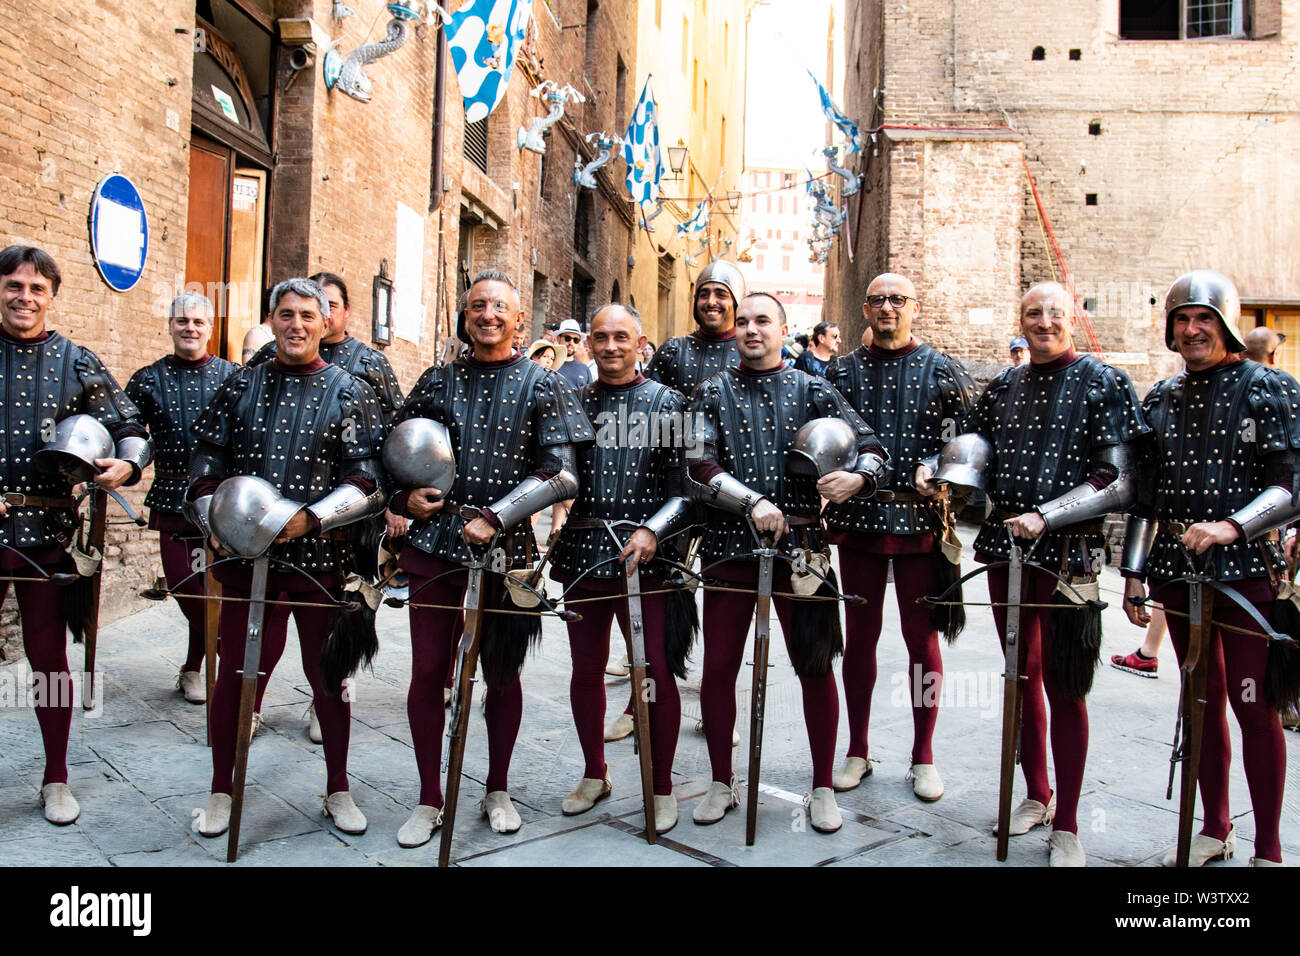 Men in historical medieval costumes line up in preparation for the parade of the Palio through the streets of Siena, Italy Stock Photo